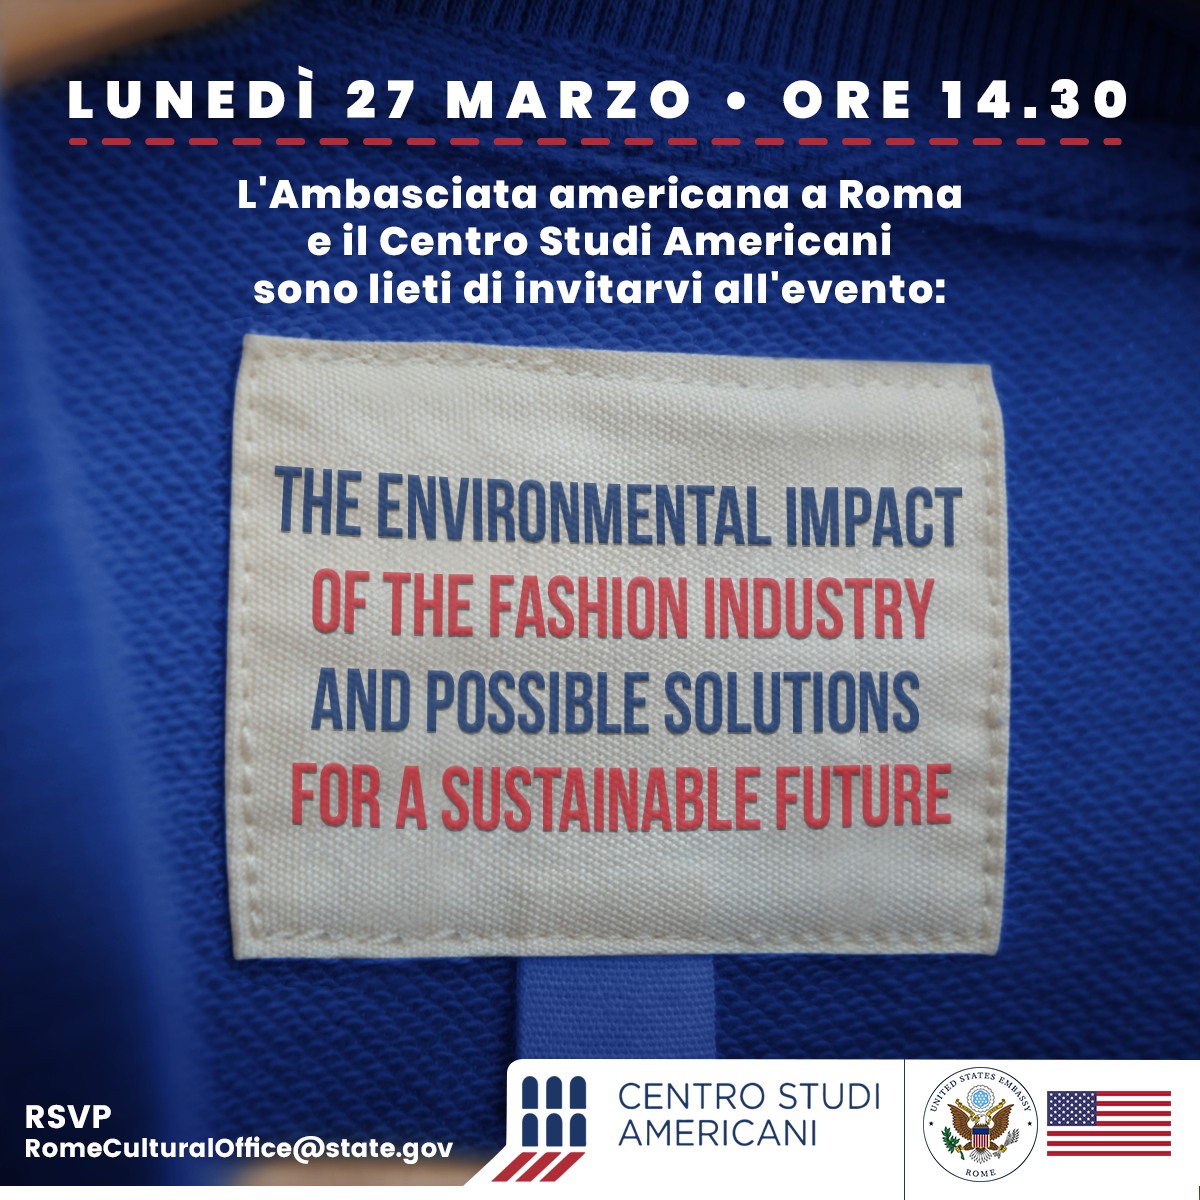 The Environmental Impact of the Fashion Industry and Possible Solutions for a Sustainable Future